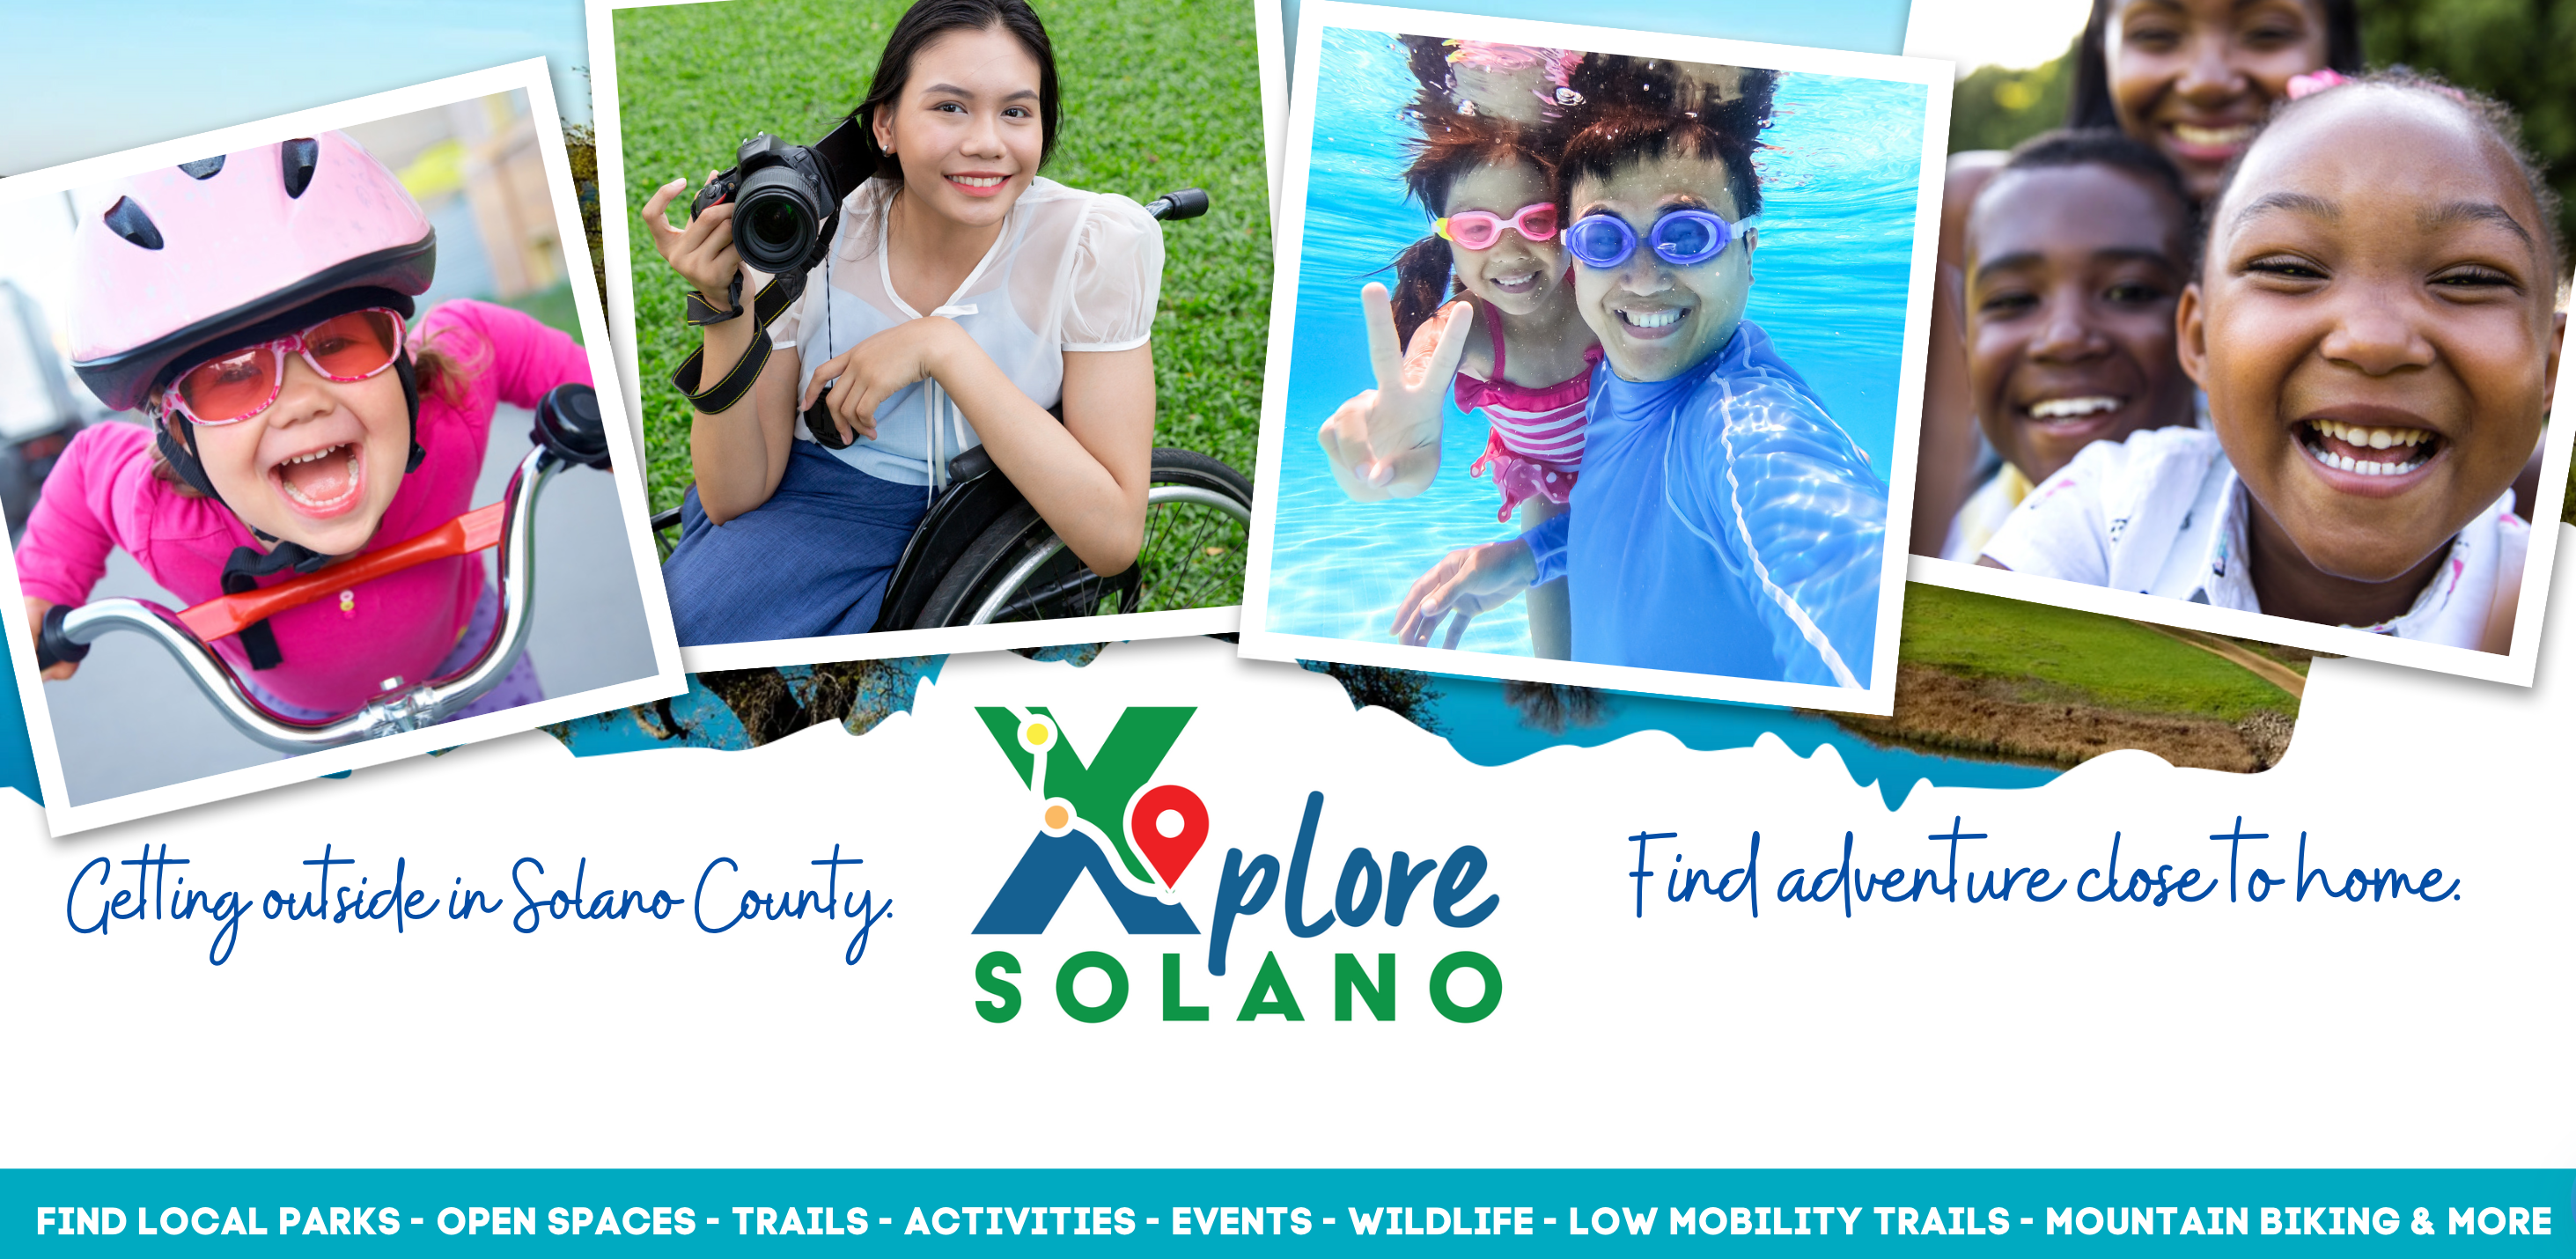 Xplore Solano community in the Outerspatial app. Find places to go and things to do outside in Solano.